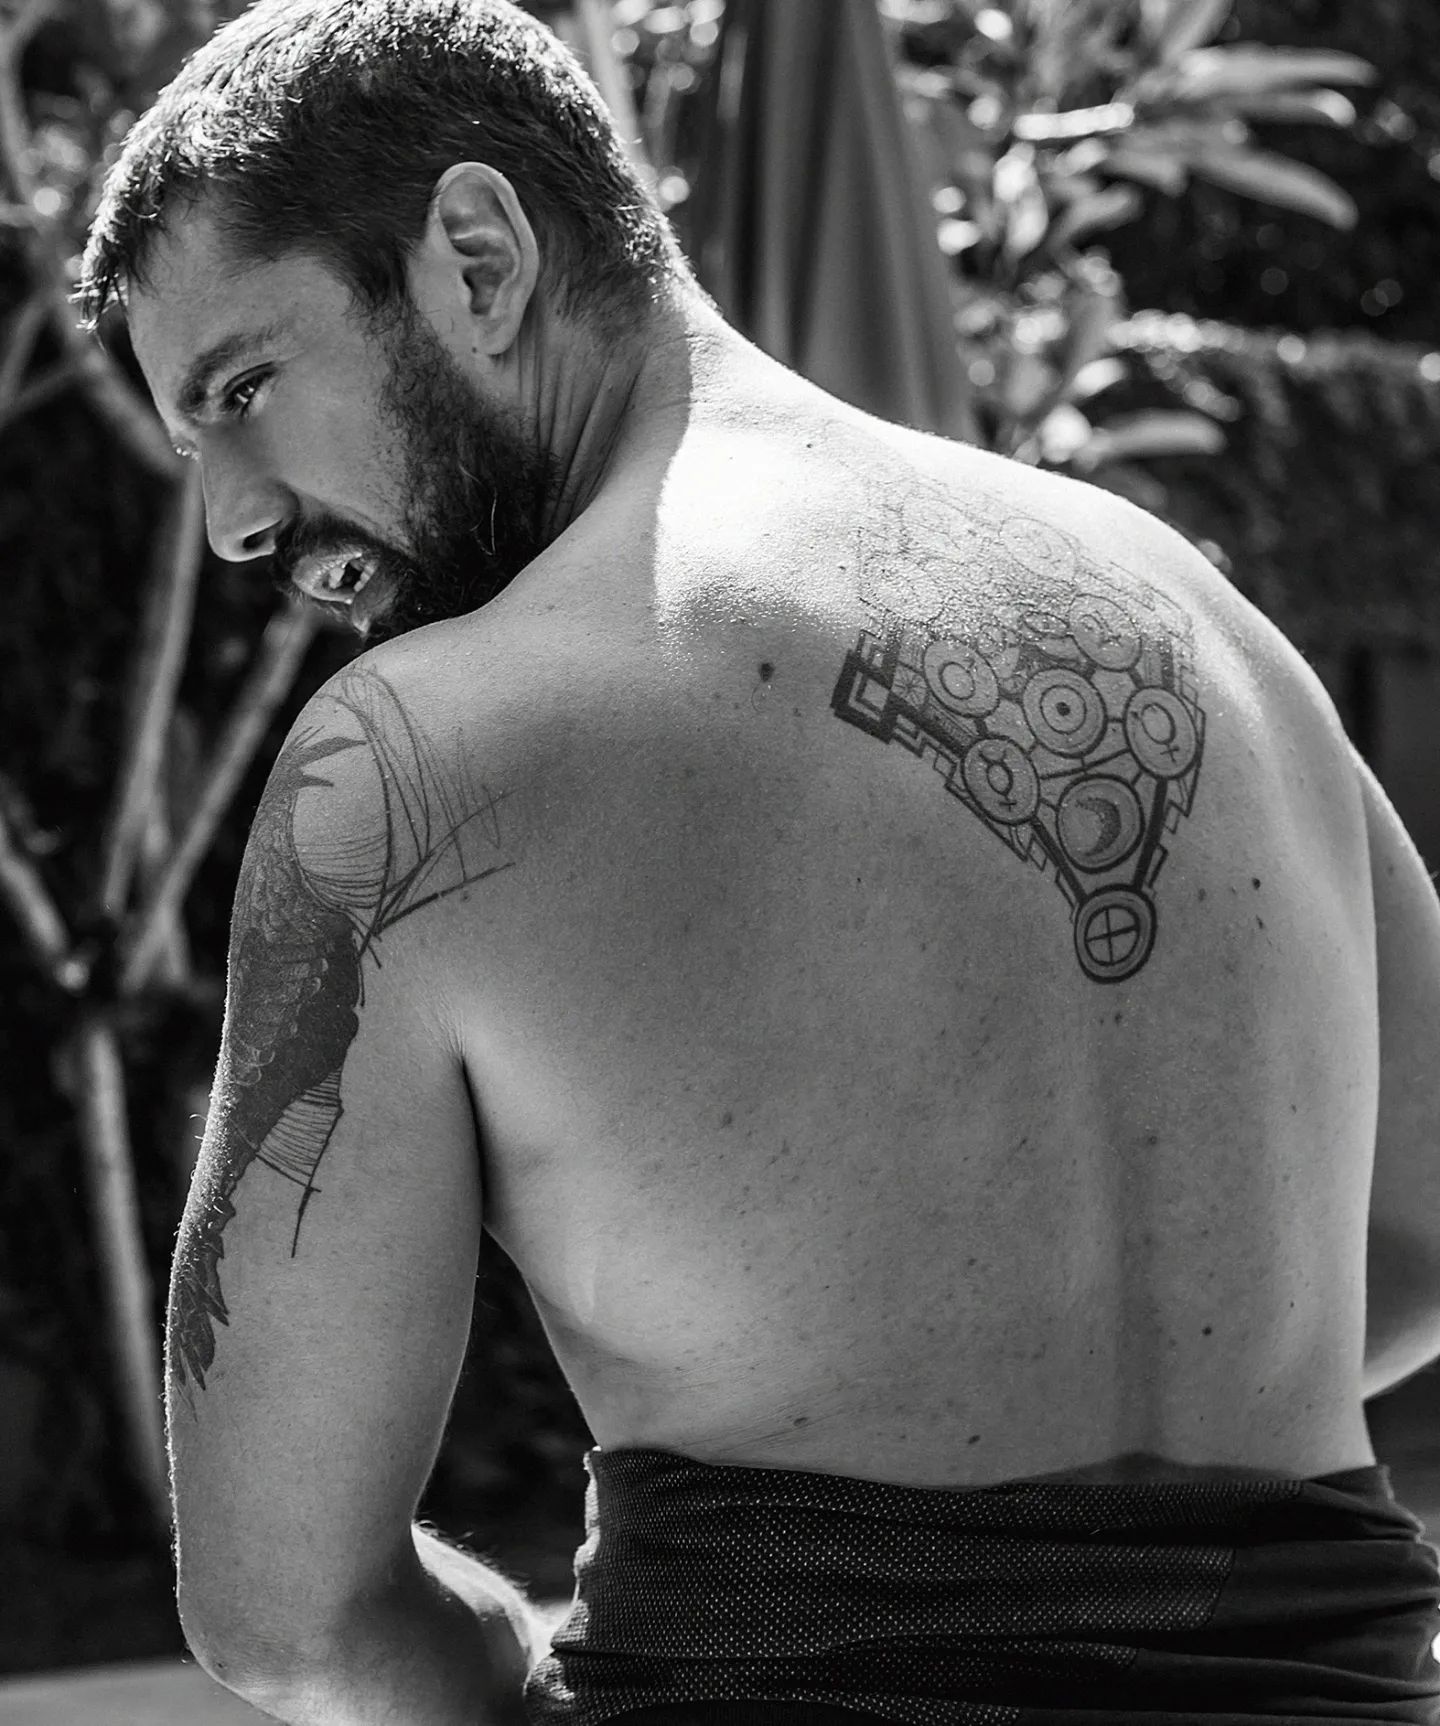 https://e.radikal.host/2023/04/22/Photo-by-Sergio-Baia-on-April-01-2023.-May-be-a-black-and-white-image-of-1-person-beard-biceps-tattoo-and-sarong..jpg